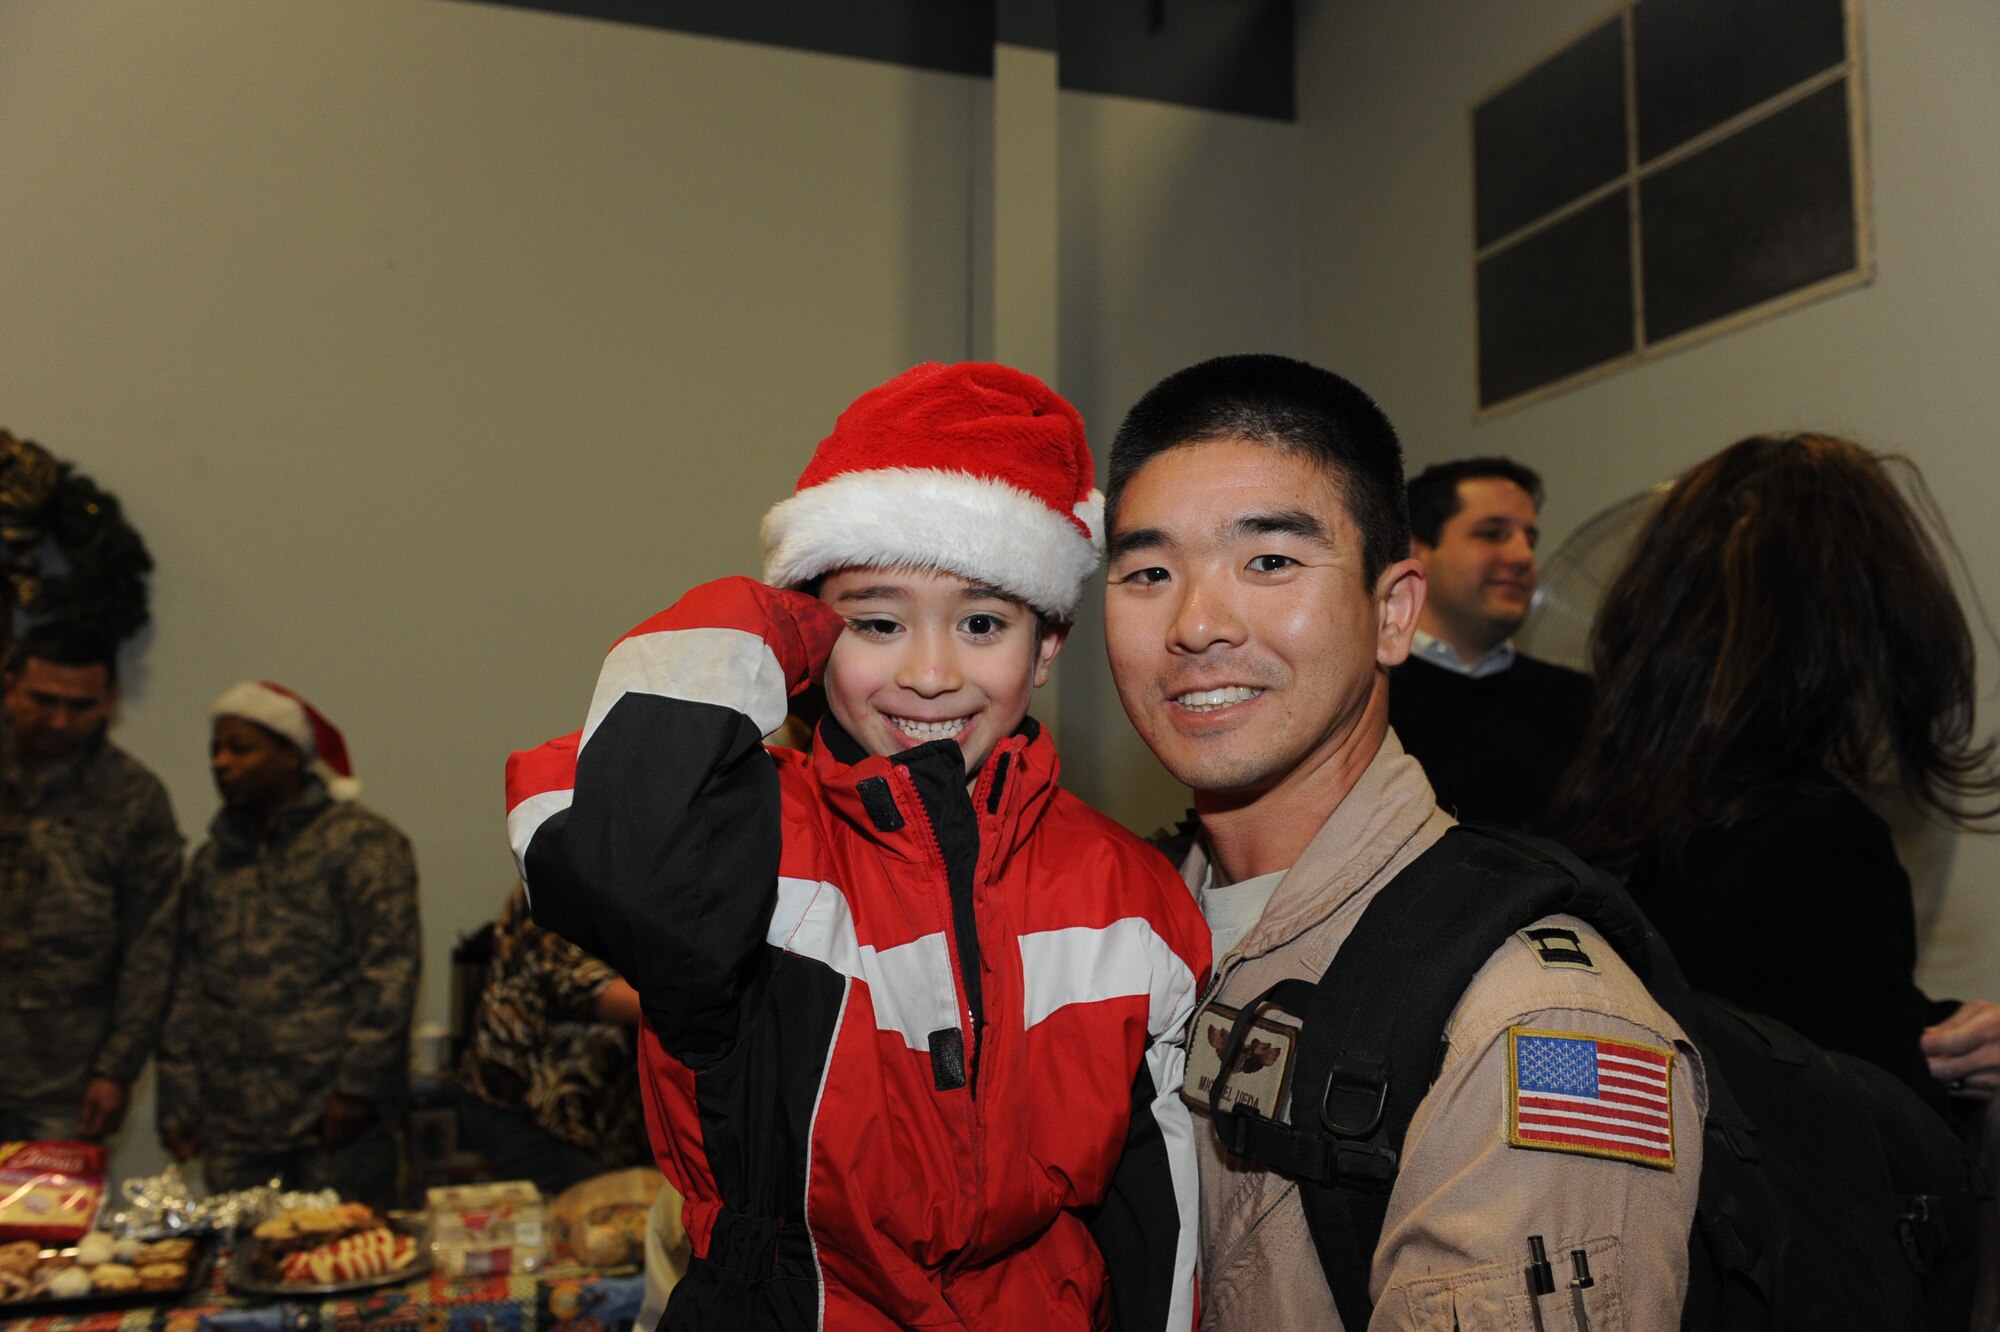 Capt. Michael Ueda, a 61st Airlift Squadron pilot, poses for a photo with his son, Lucas, after his return from his deployment Dec. 25 at Building 430. Nearly 160 Airmen returned home Christmas Day. (U.S. Air Force photo by Senior Airman Ethan Morgan)